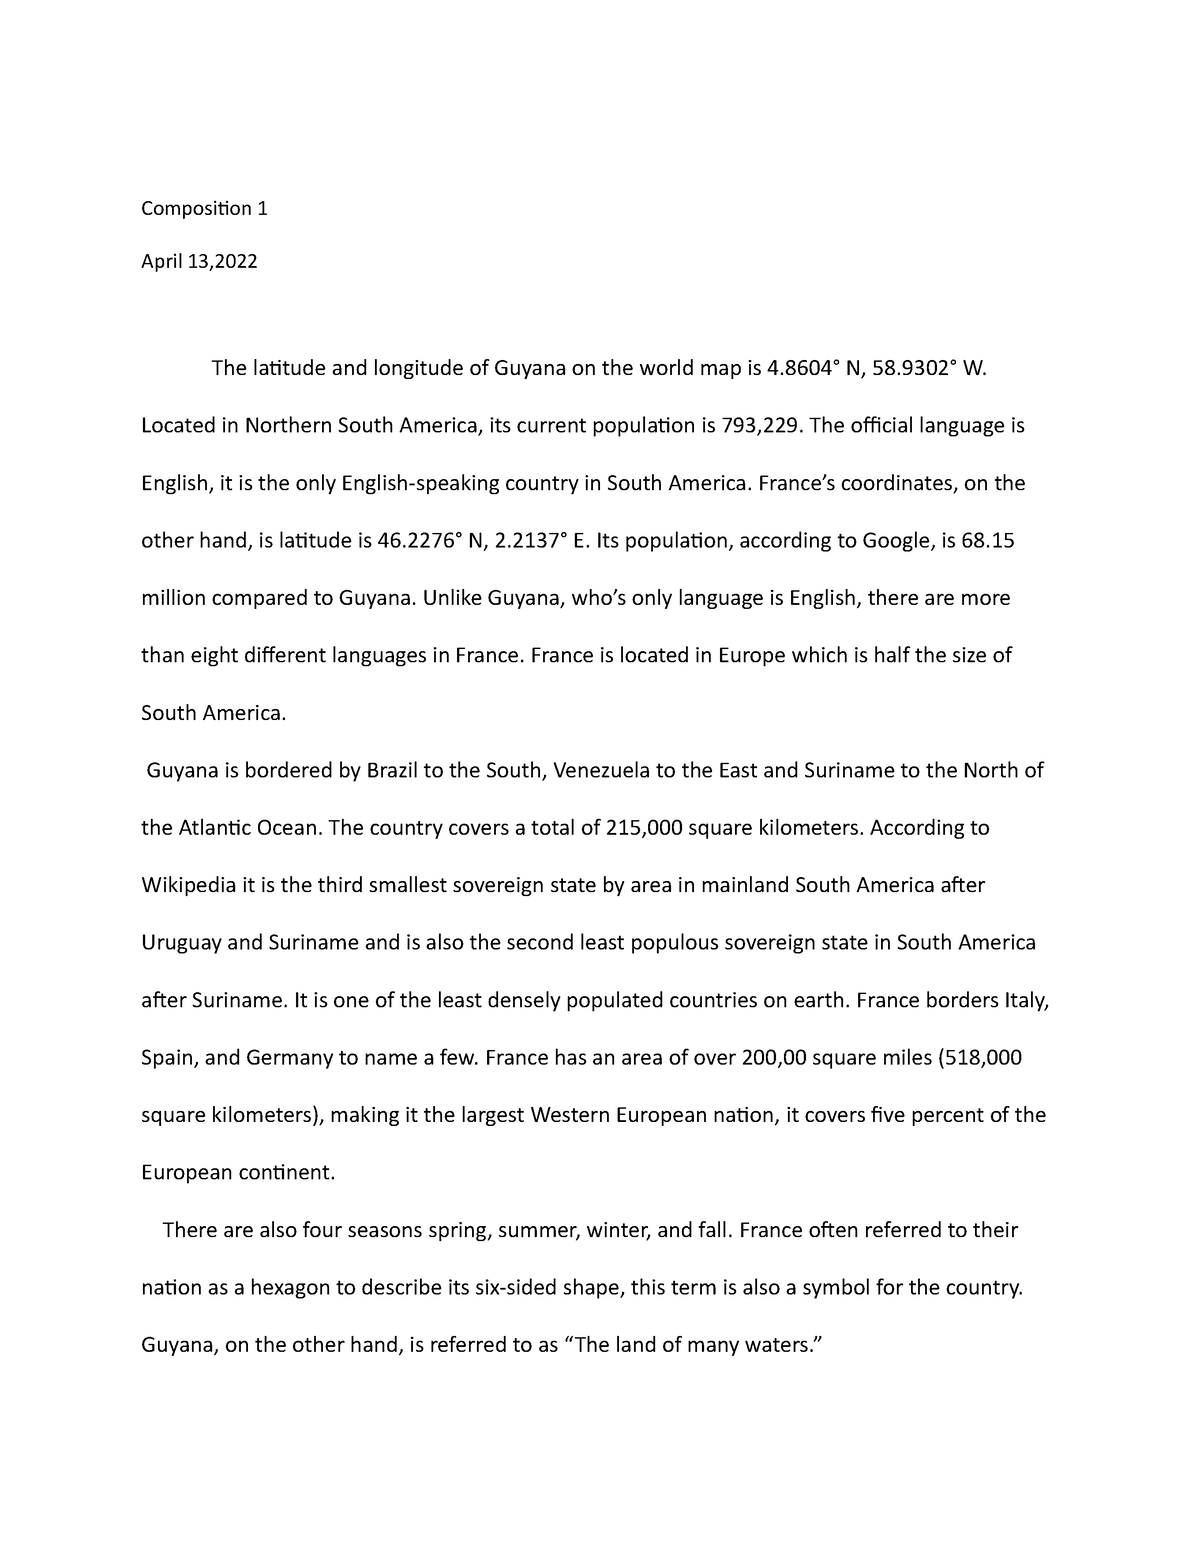 compare and contrast two countries essay